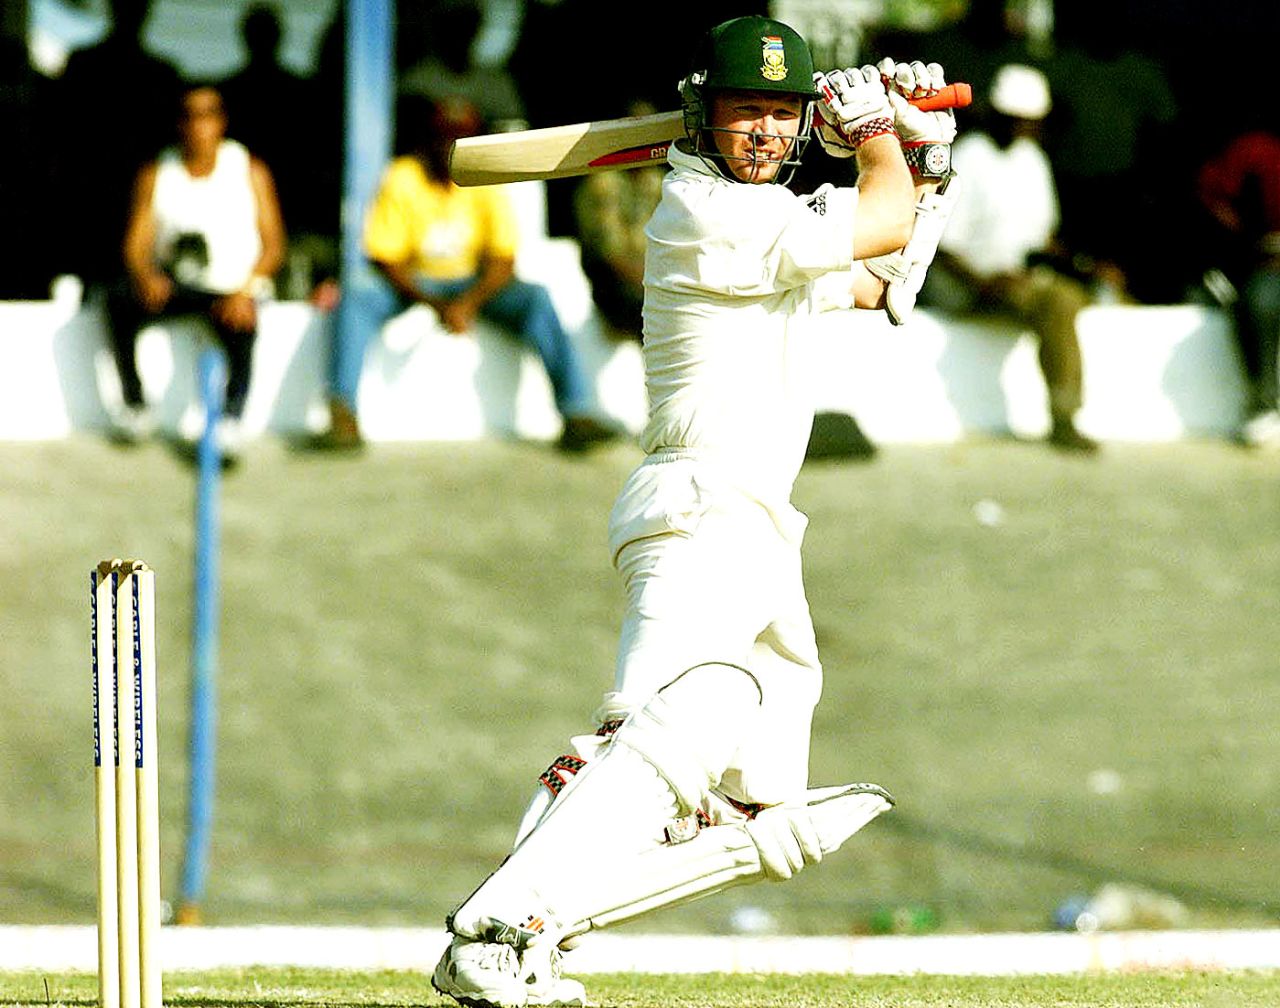 Daryll Cullinan cuts on his way to 73, West Indies v South Africa, 2nd Test, Port-of-Spain, 3rd day, March 19, 2001